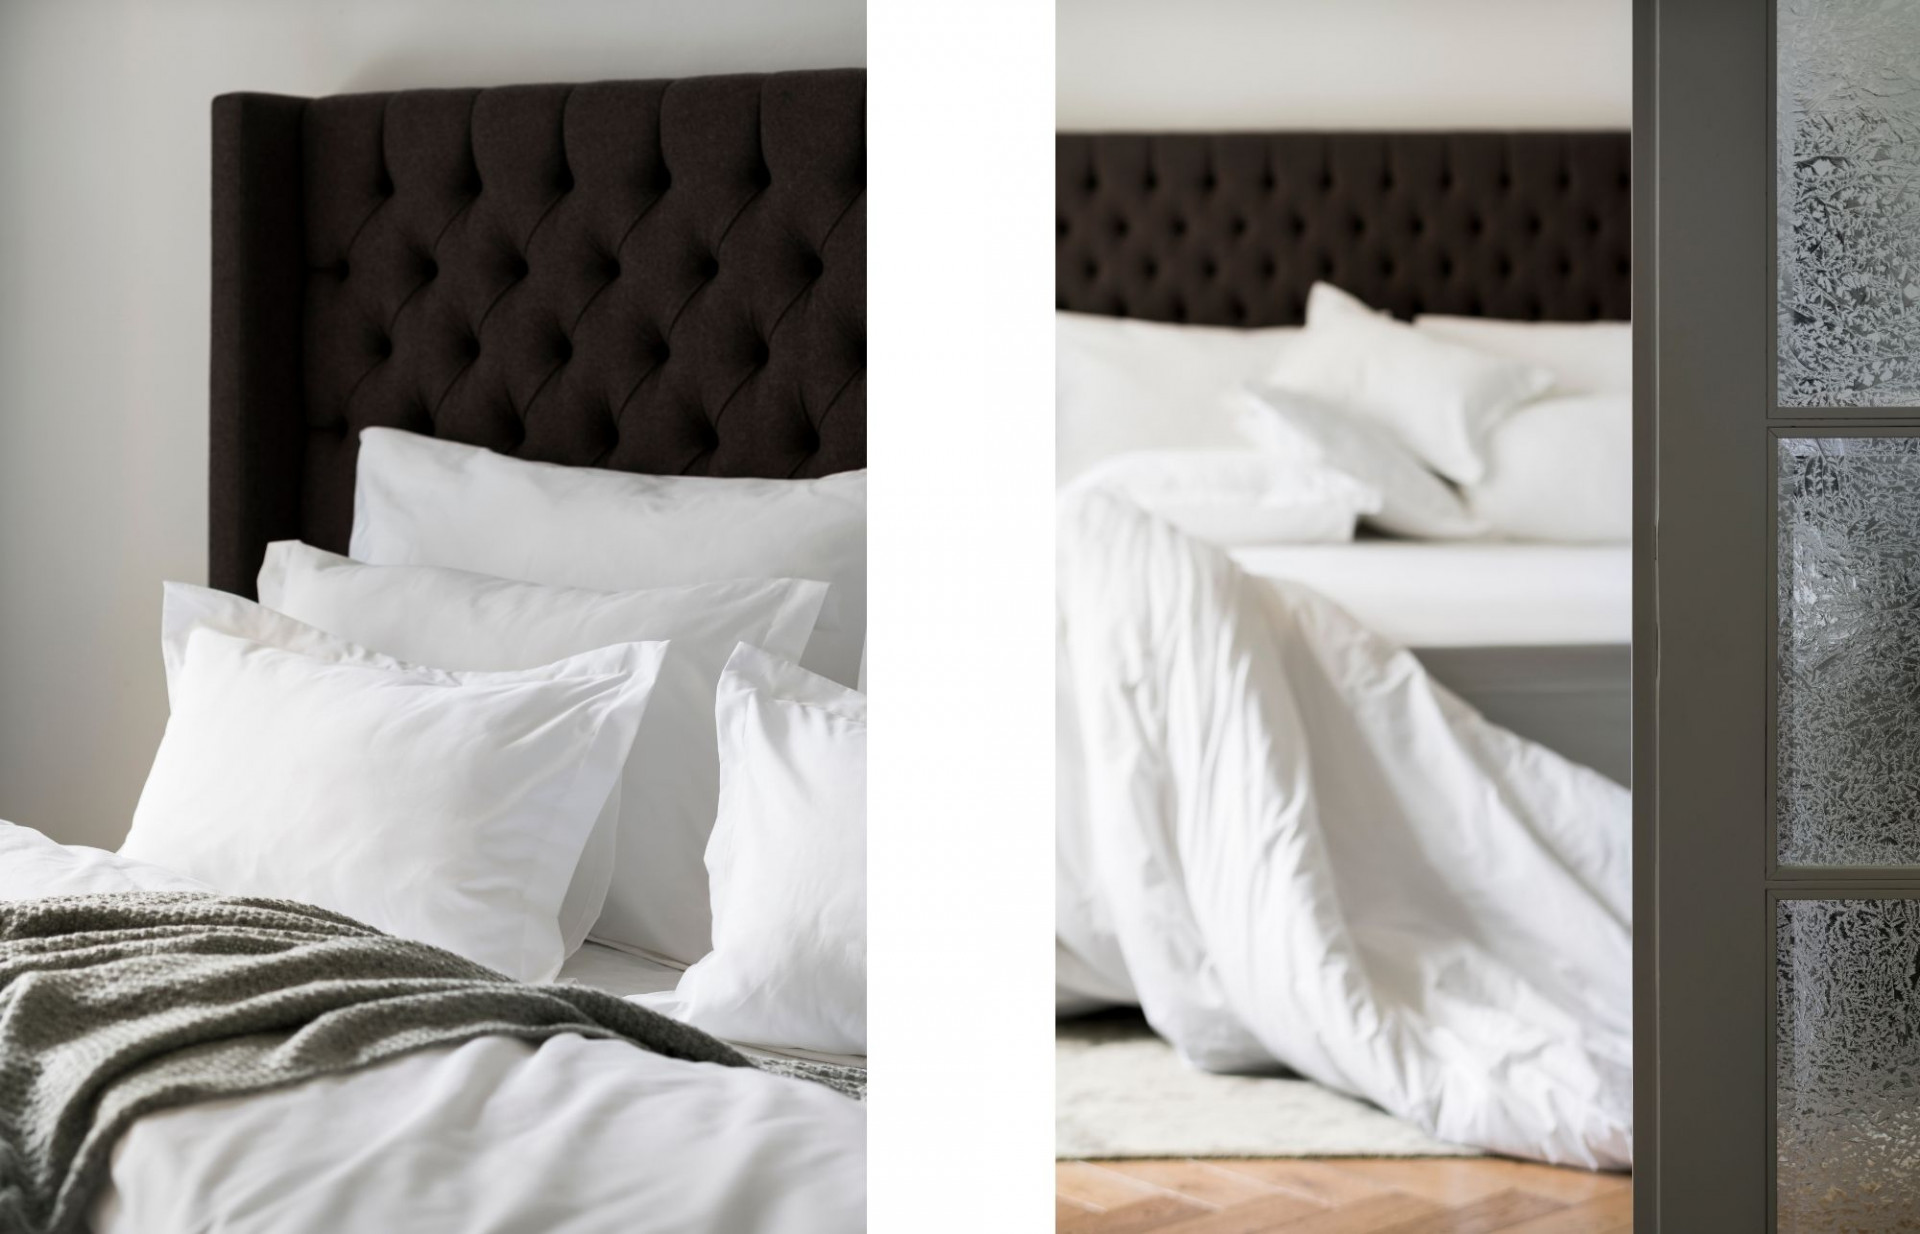 Classic and Oxford pillowcases help style any bedroom.